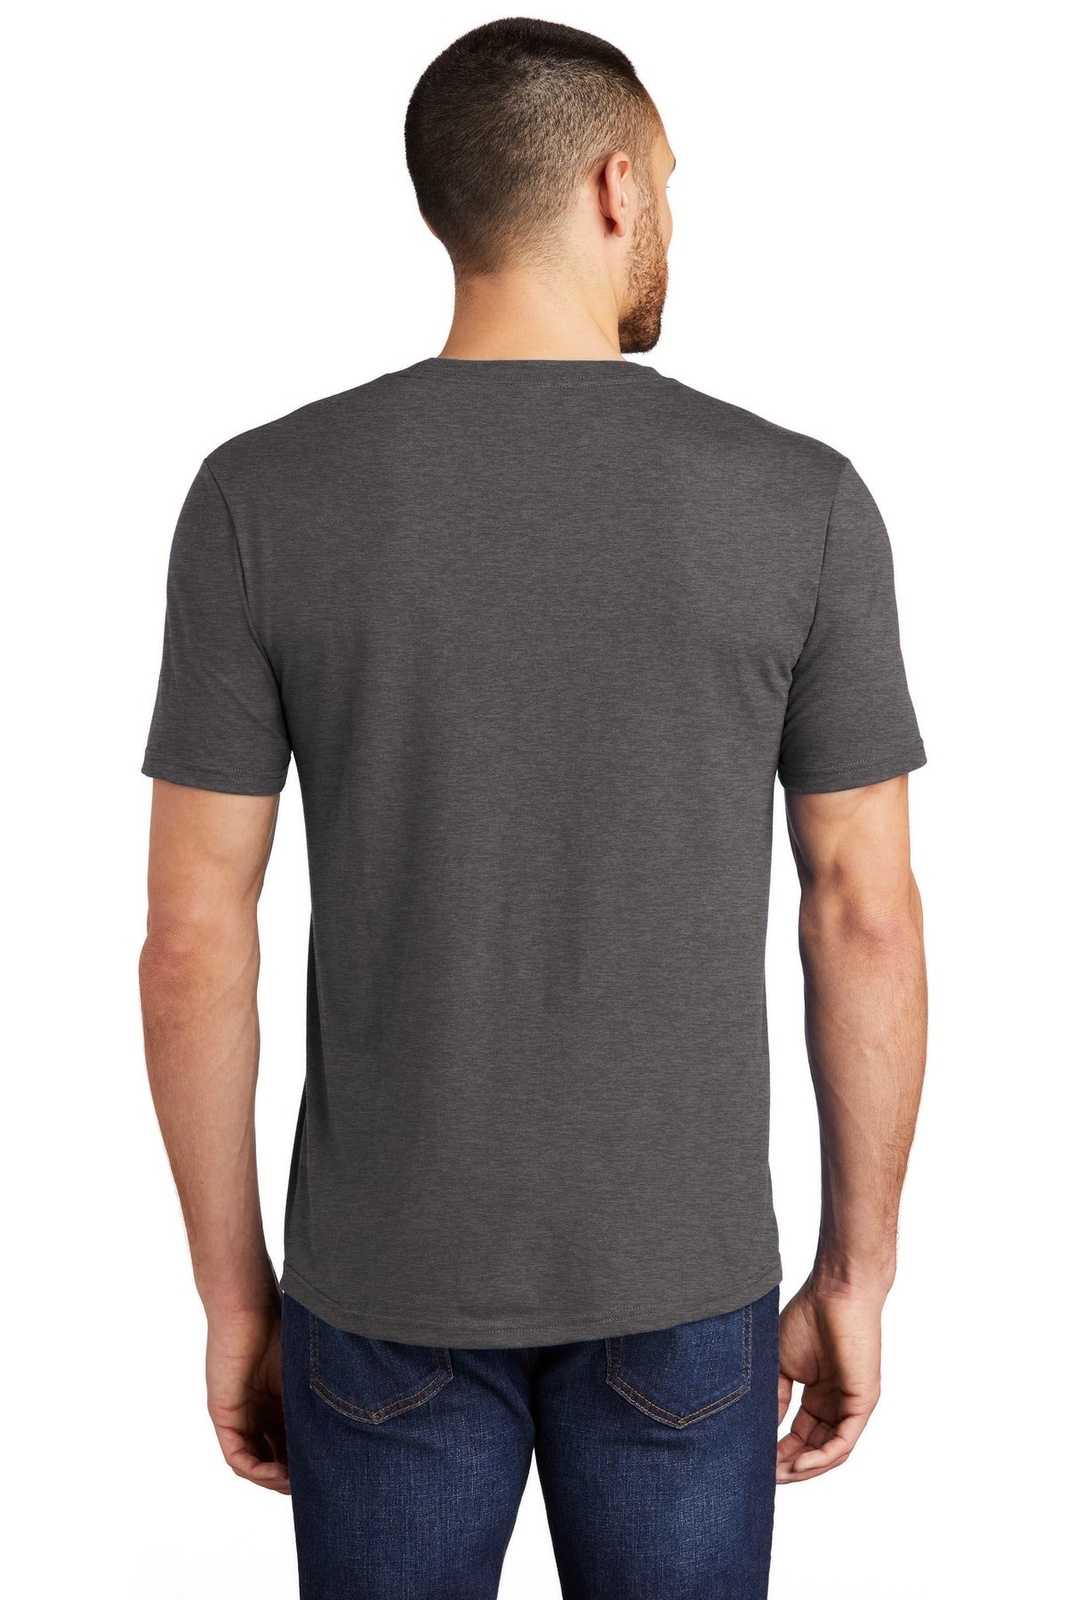 District DM130 Perfect Tri Tee - Heathered Charcoal - HIT a Double - 2